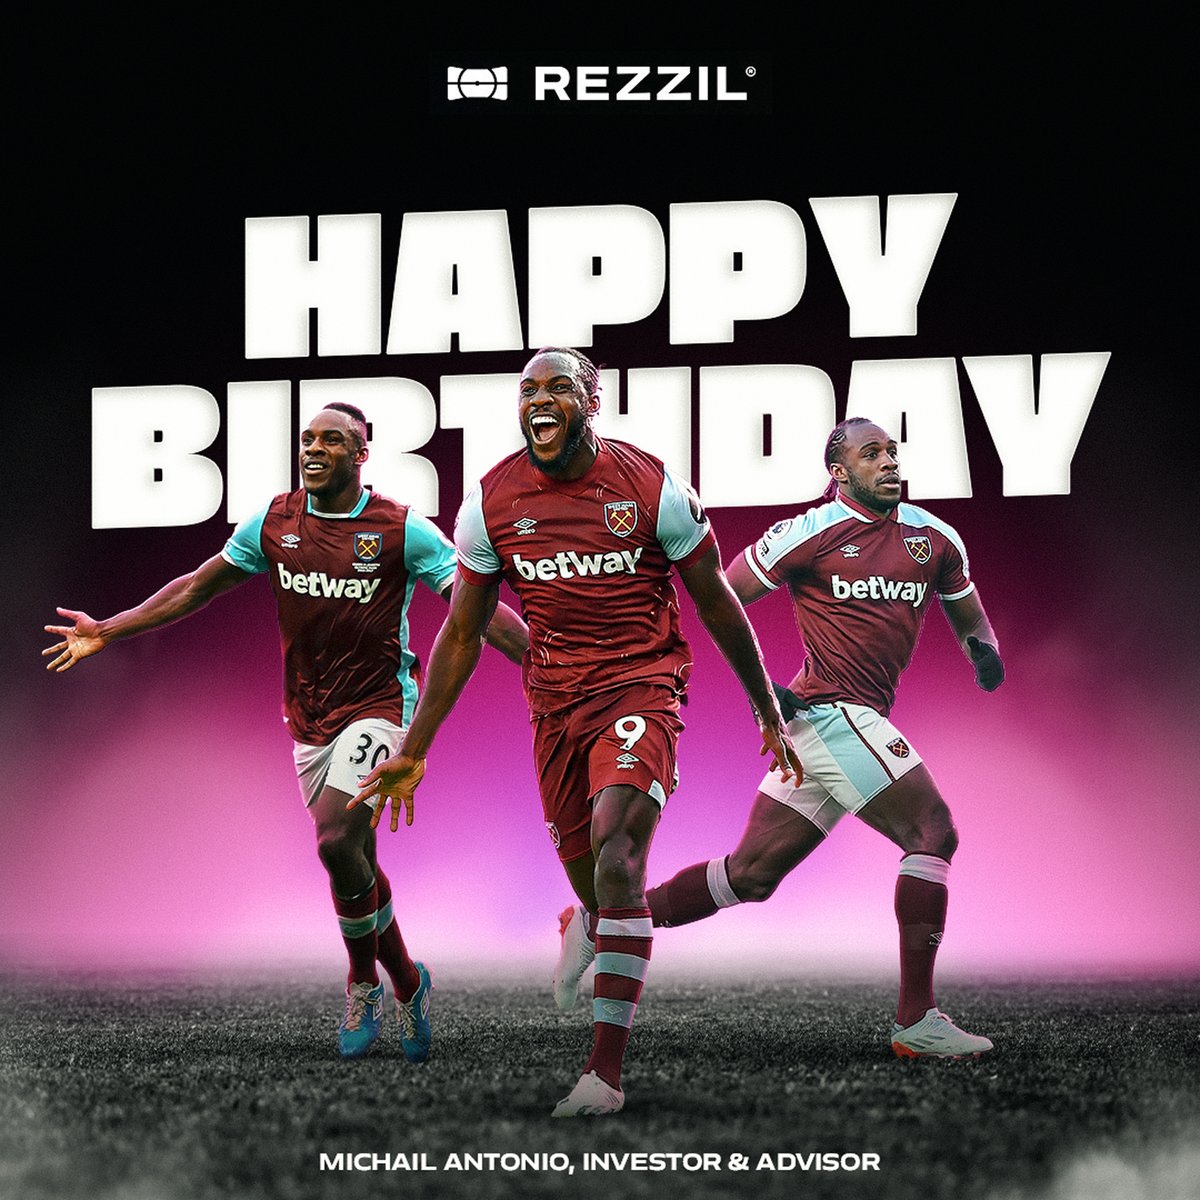 Happy birthday to the amazing @michailantonio ! 🎉🎂 Thank you for all your hard work and dedication as an investor and advisor for Rezzil. Your input has been invaluable to the team. Wishing you all the best! Cheers to you, Michail! 🥳🎈